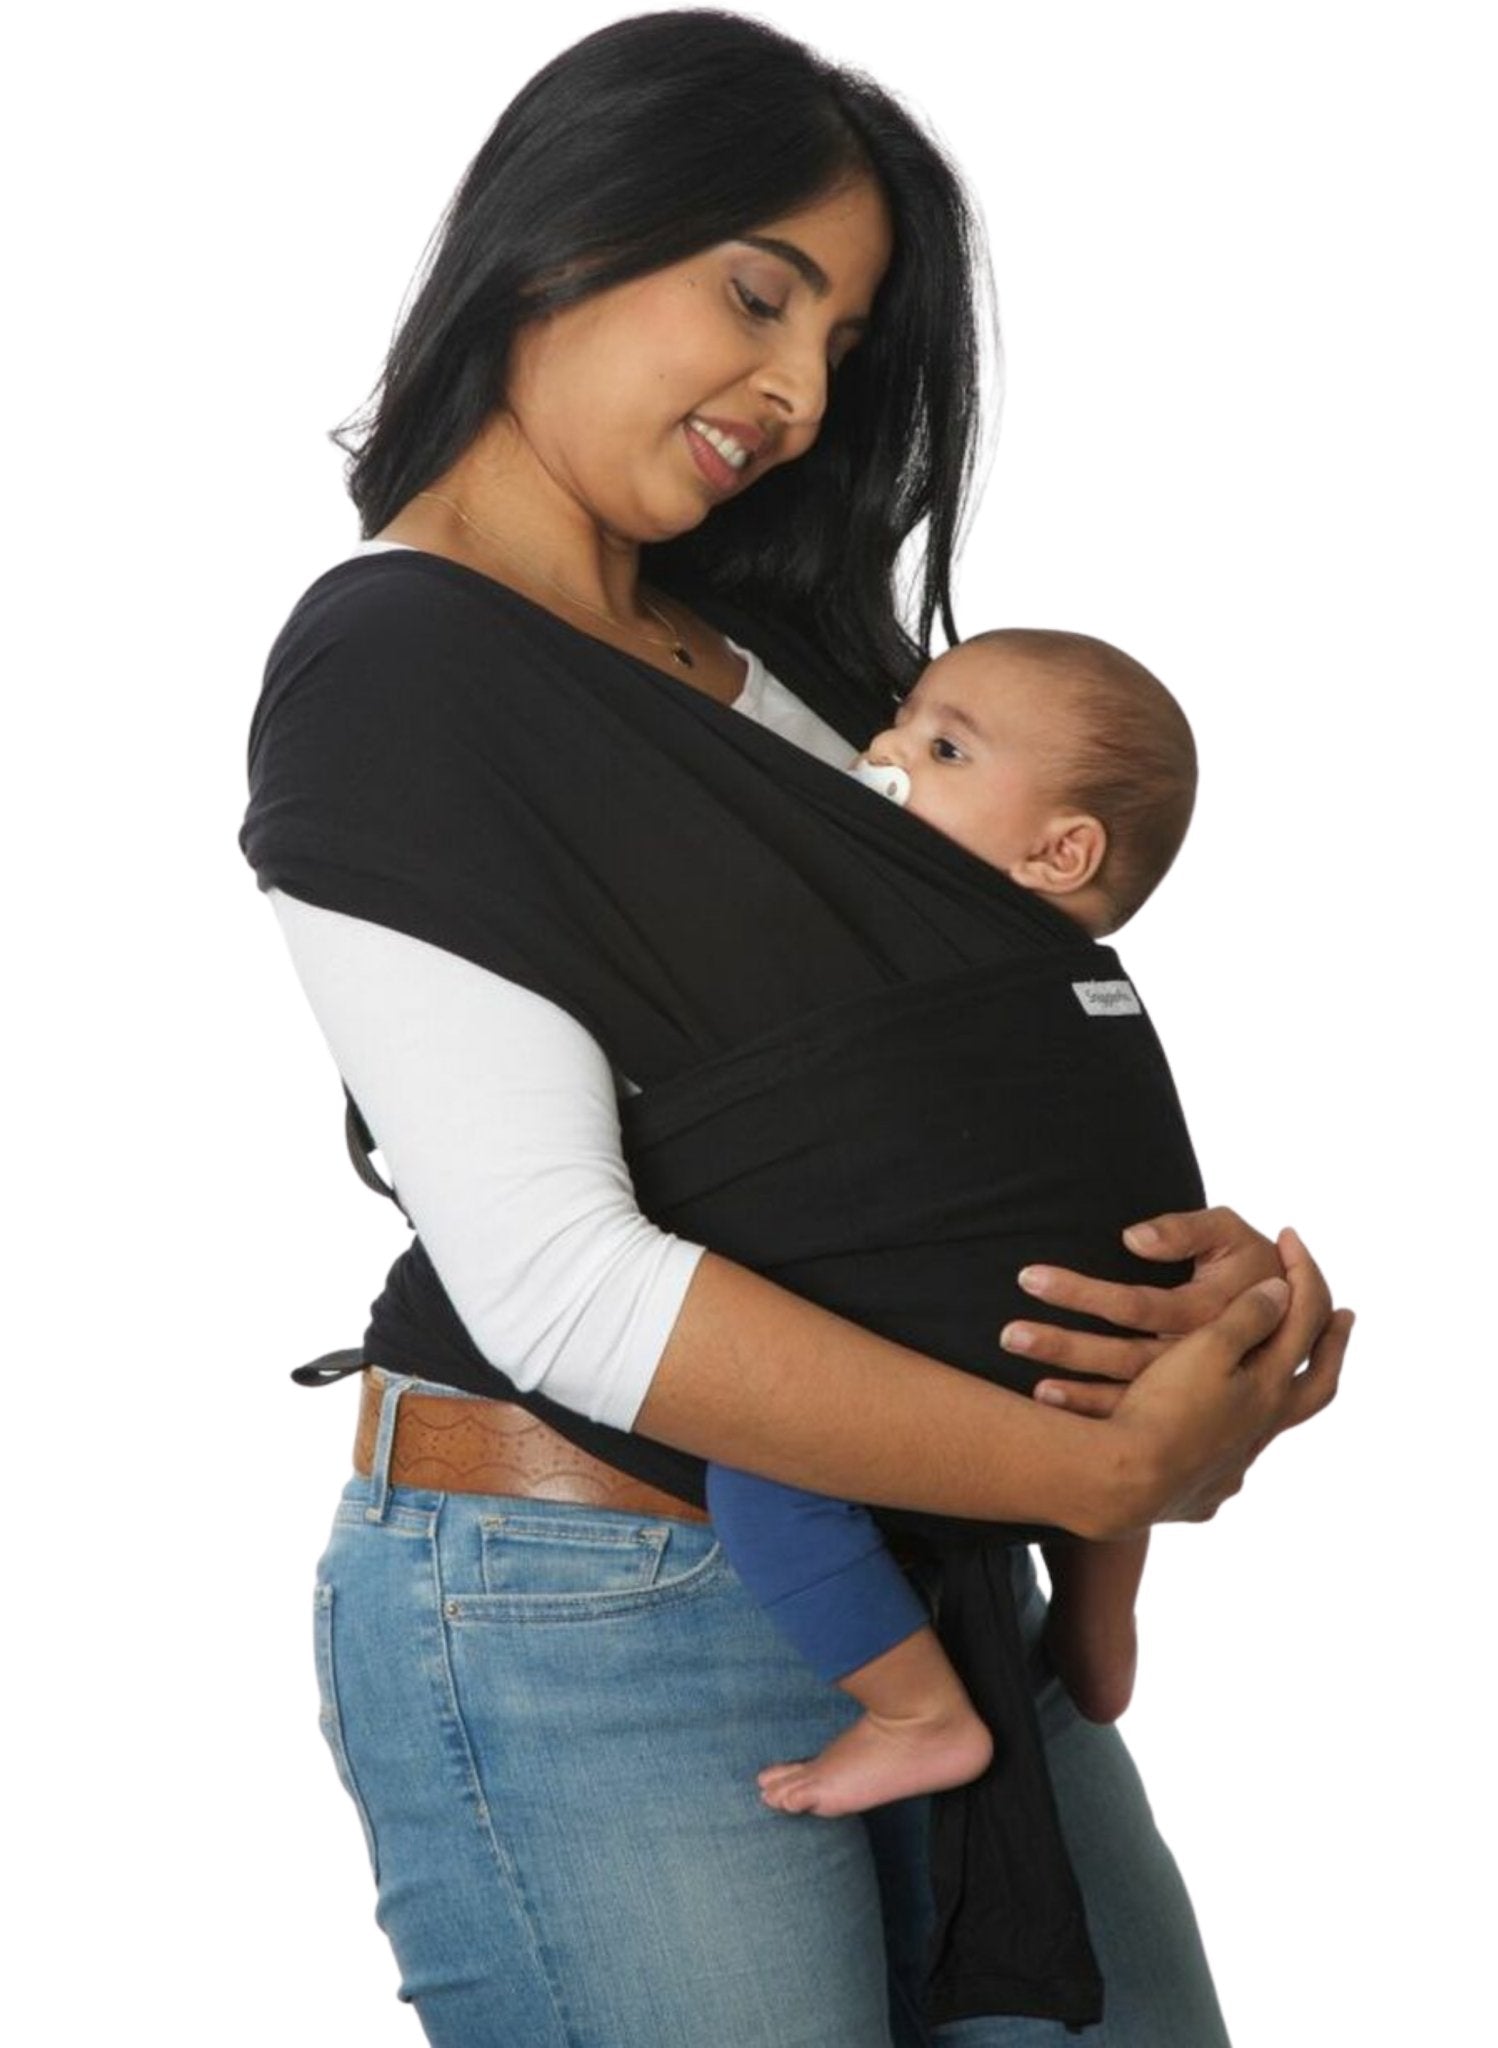 SnuggleRoo Baby Carrier - Black - Mums and Bumps